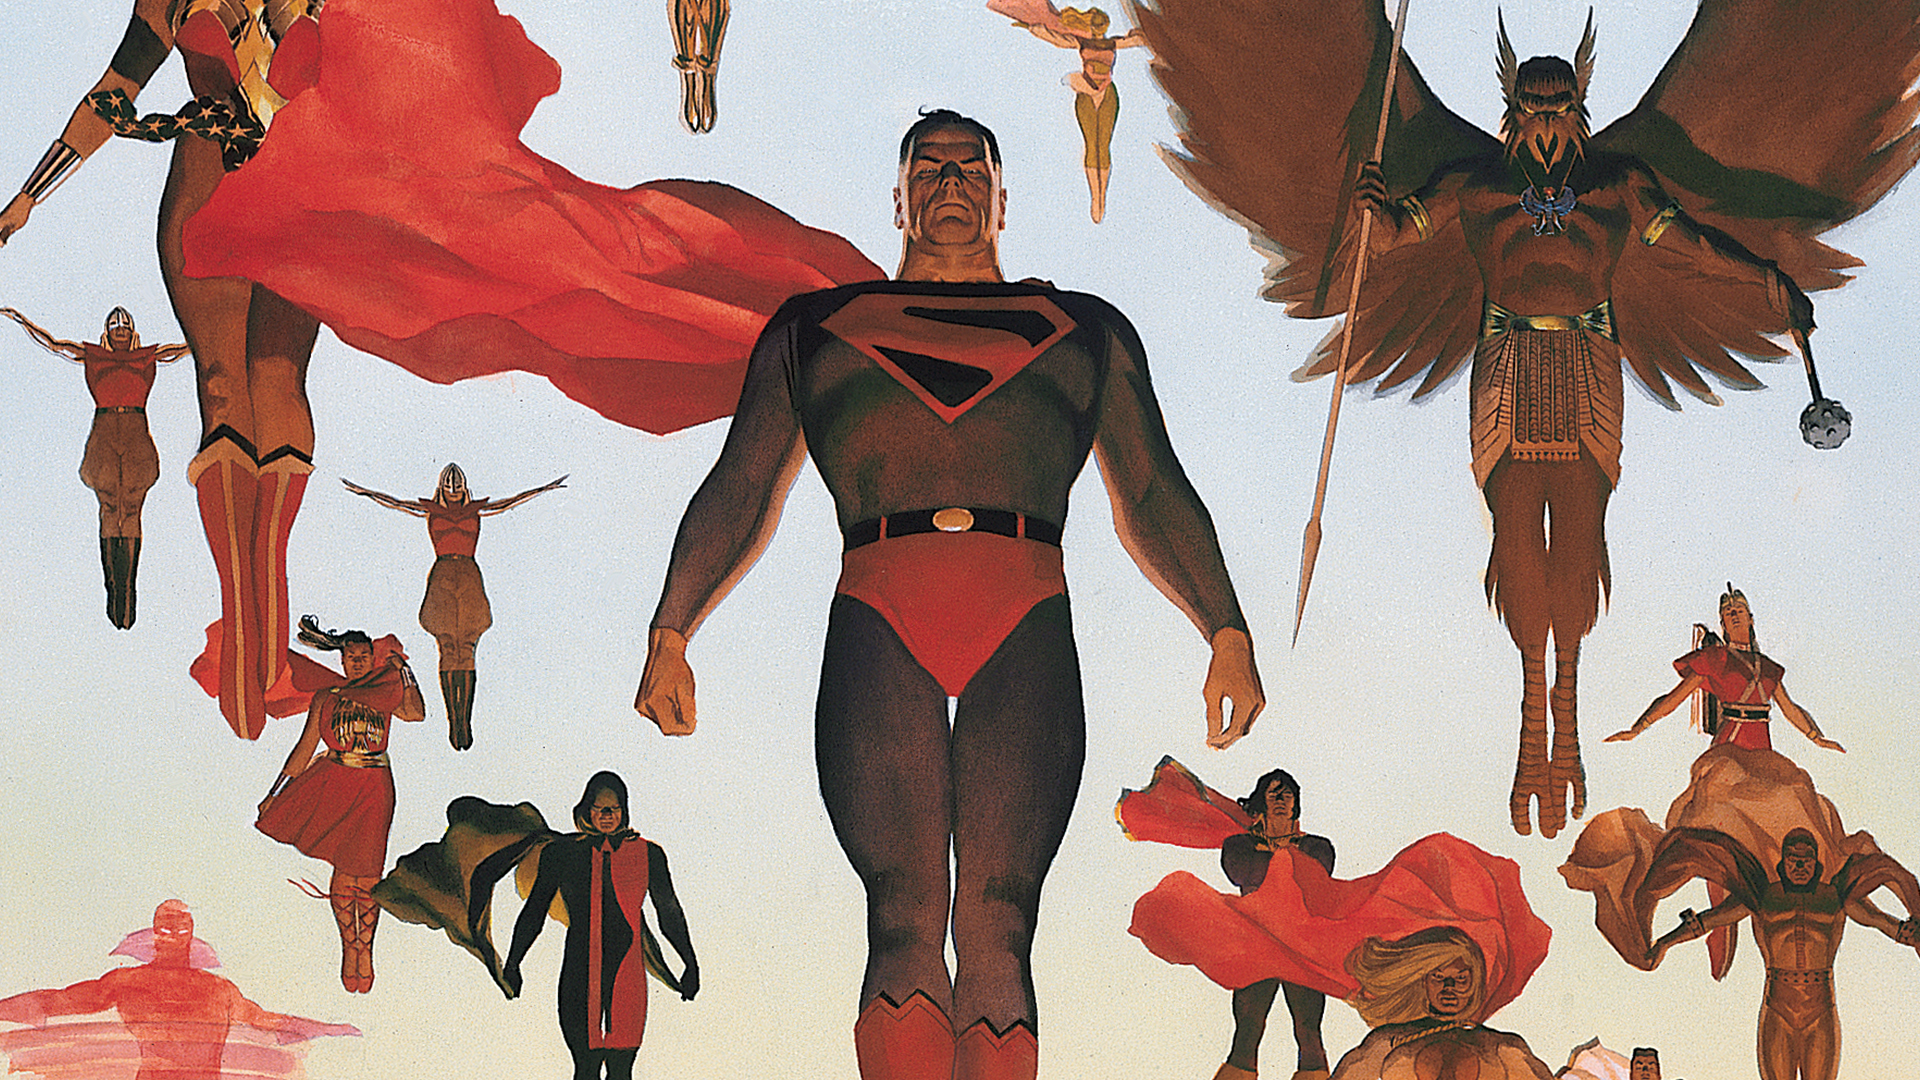 Alex Ross is right: Hollywood better pay comics creators